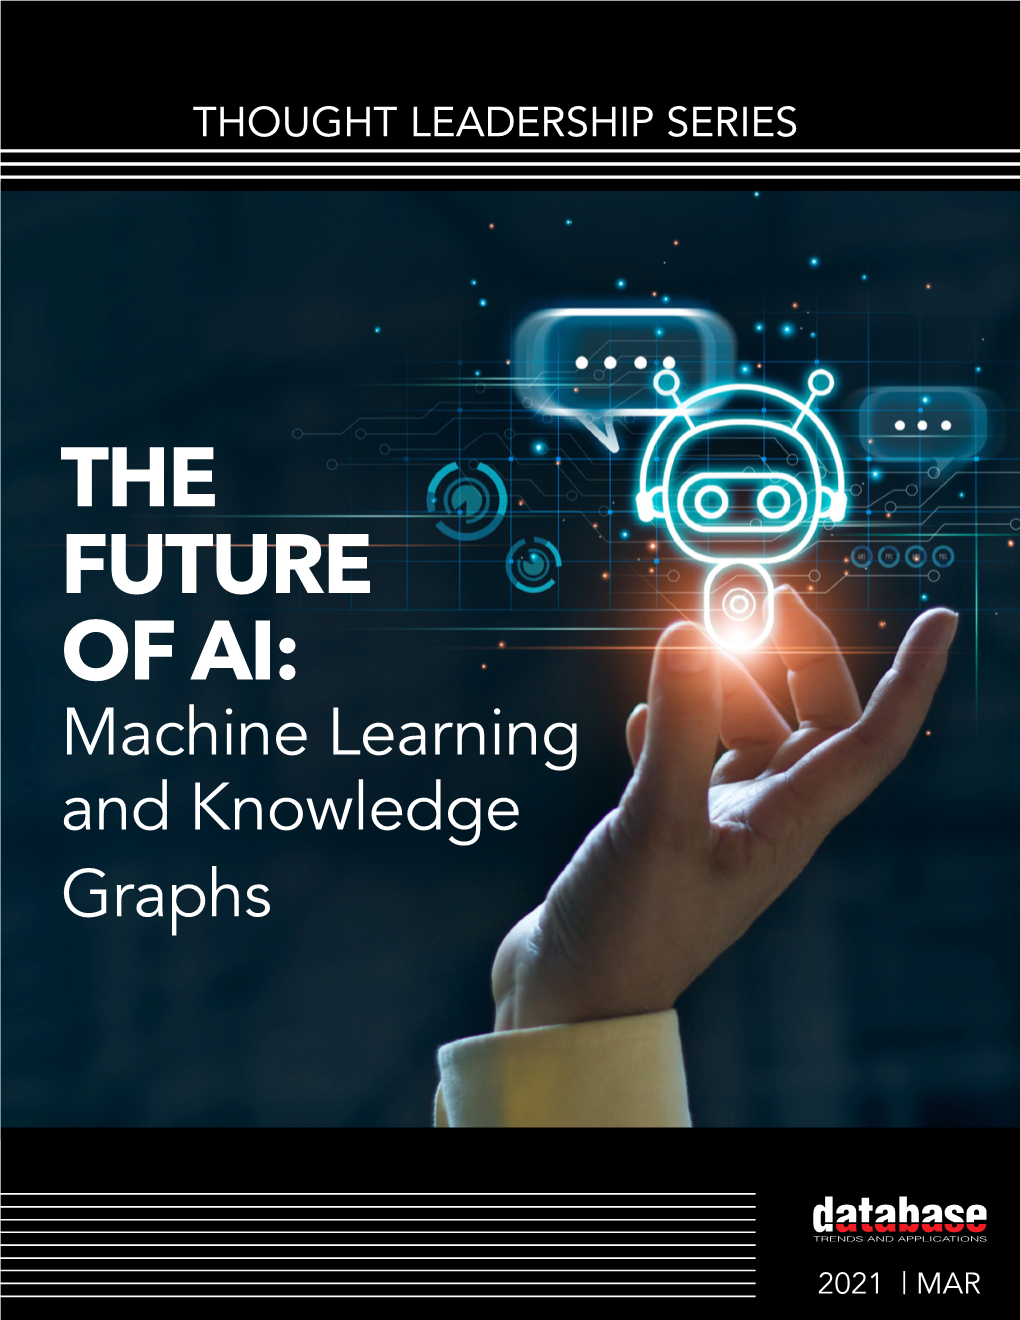 THE FUTURE of AI: Machine Learning and Knowledge Graphs